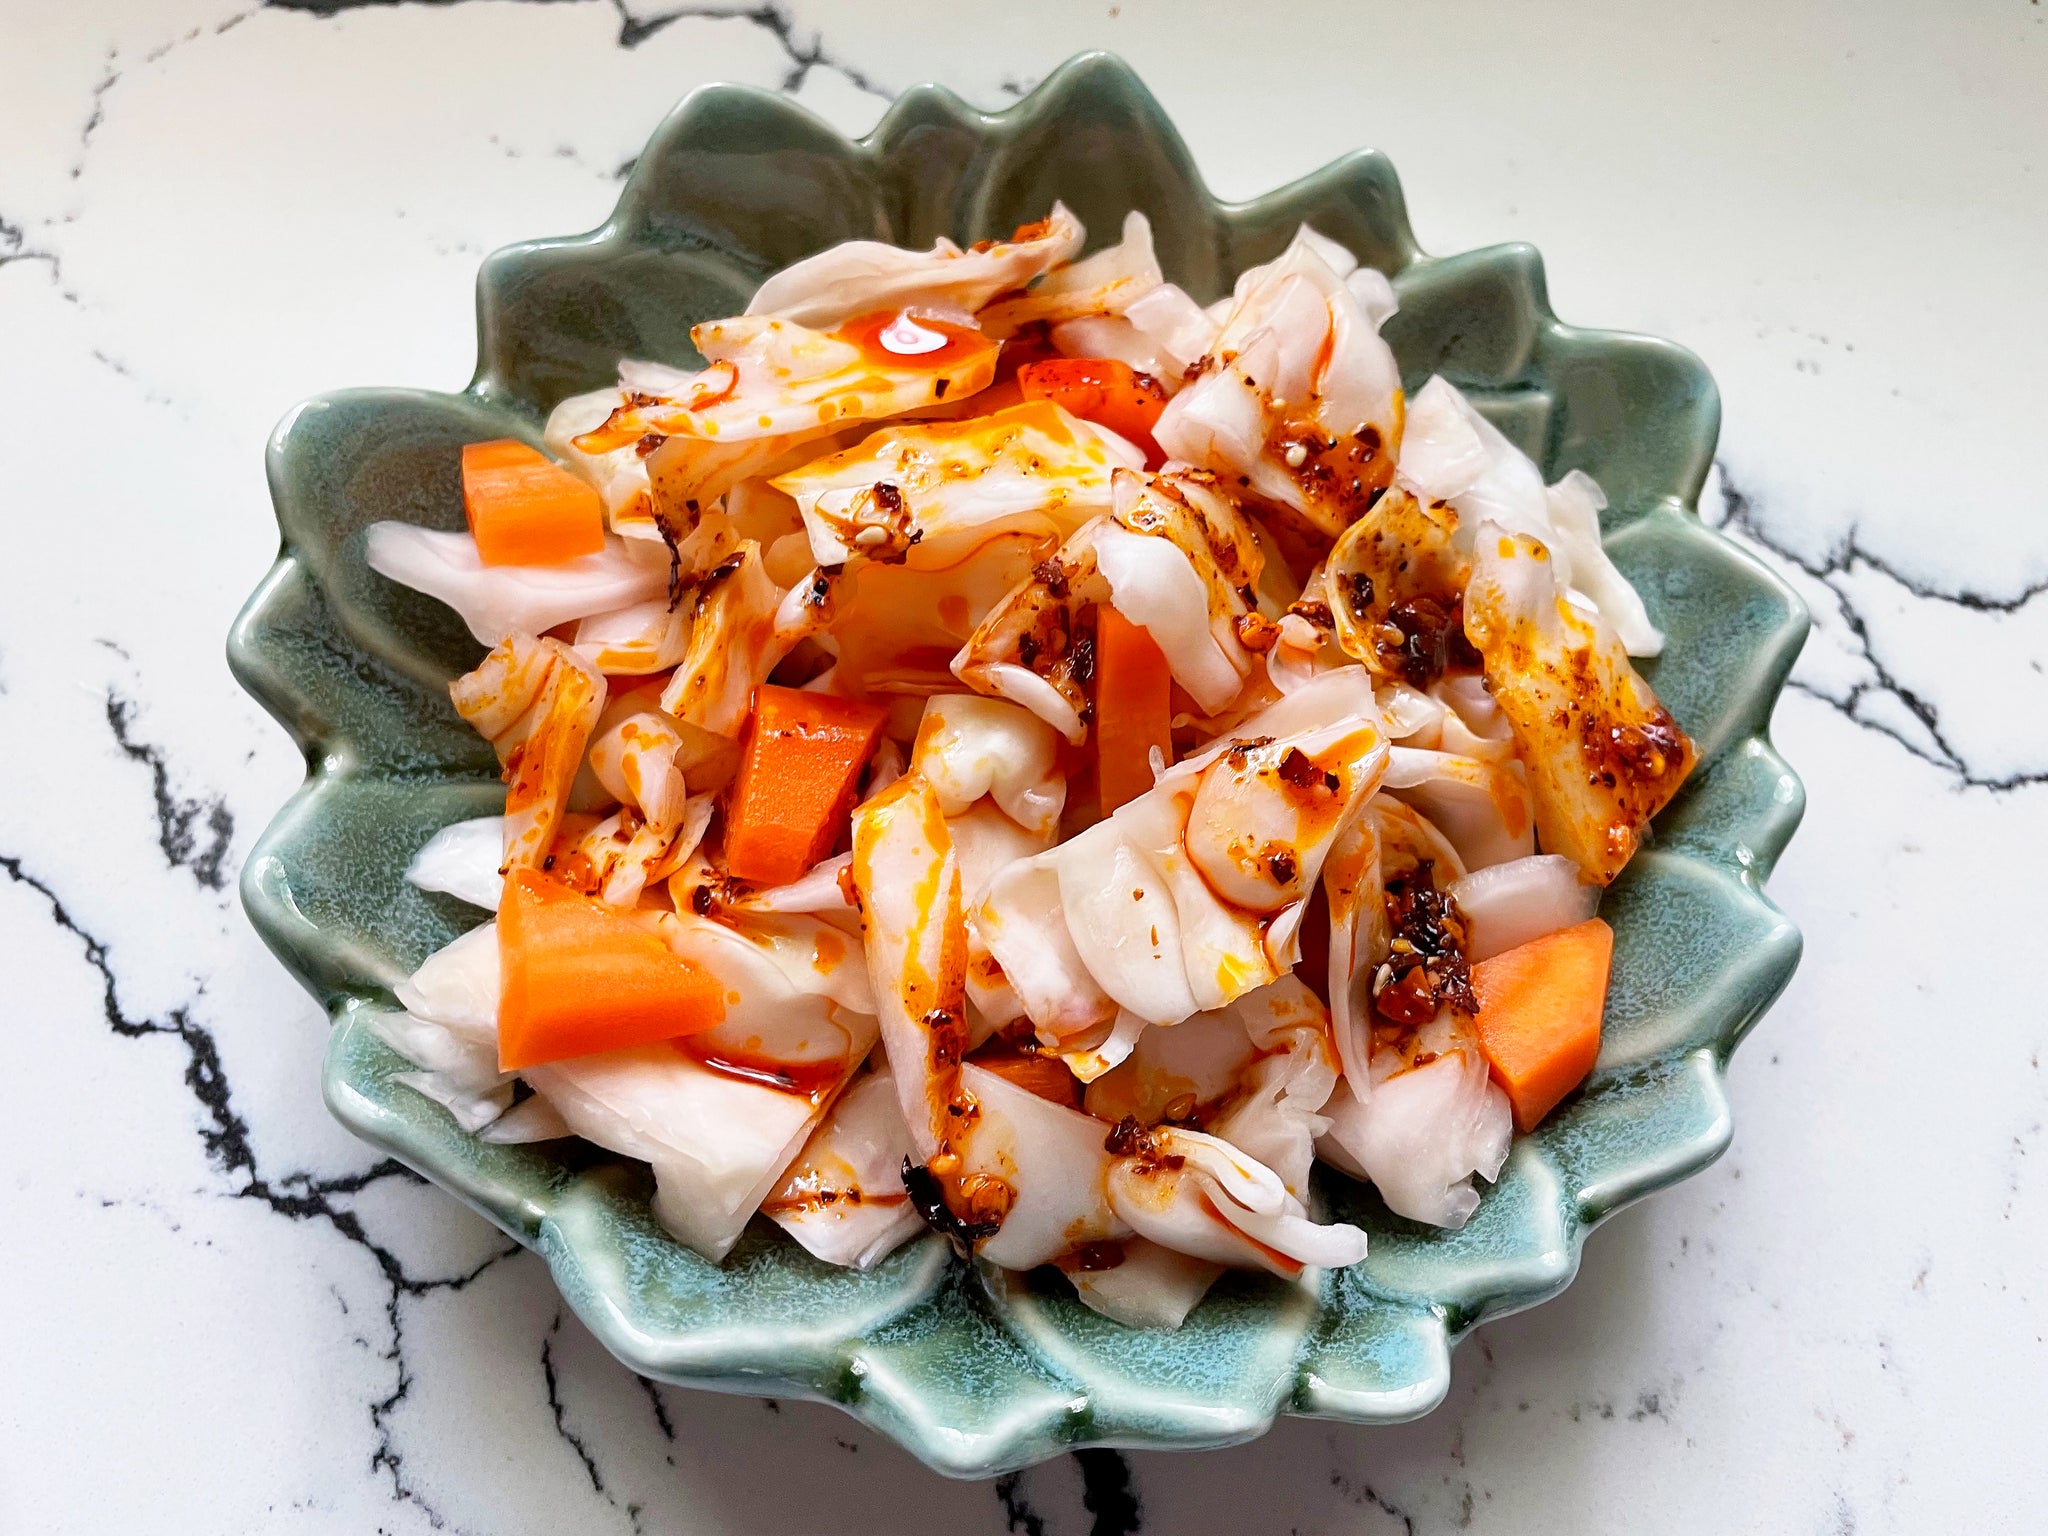 Pickled cabbage with chili oil